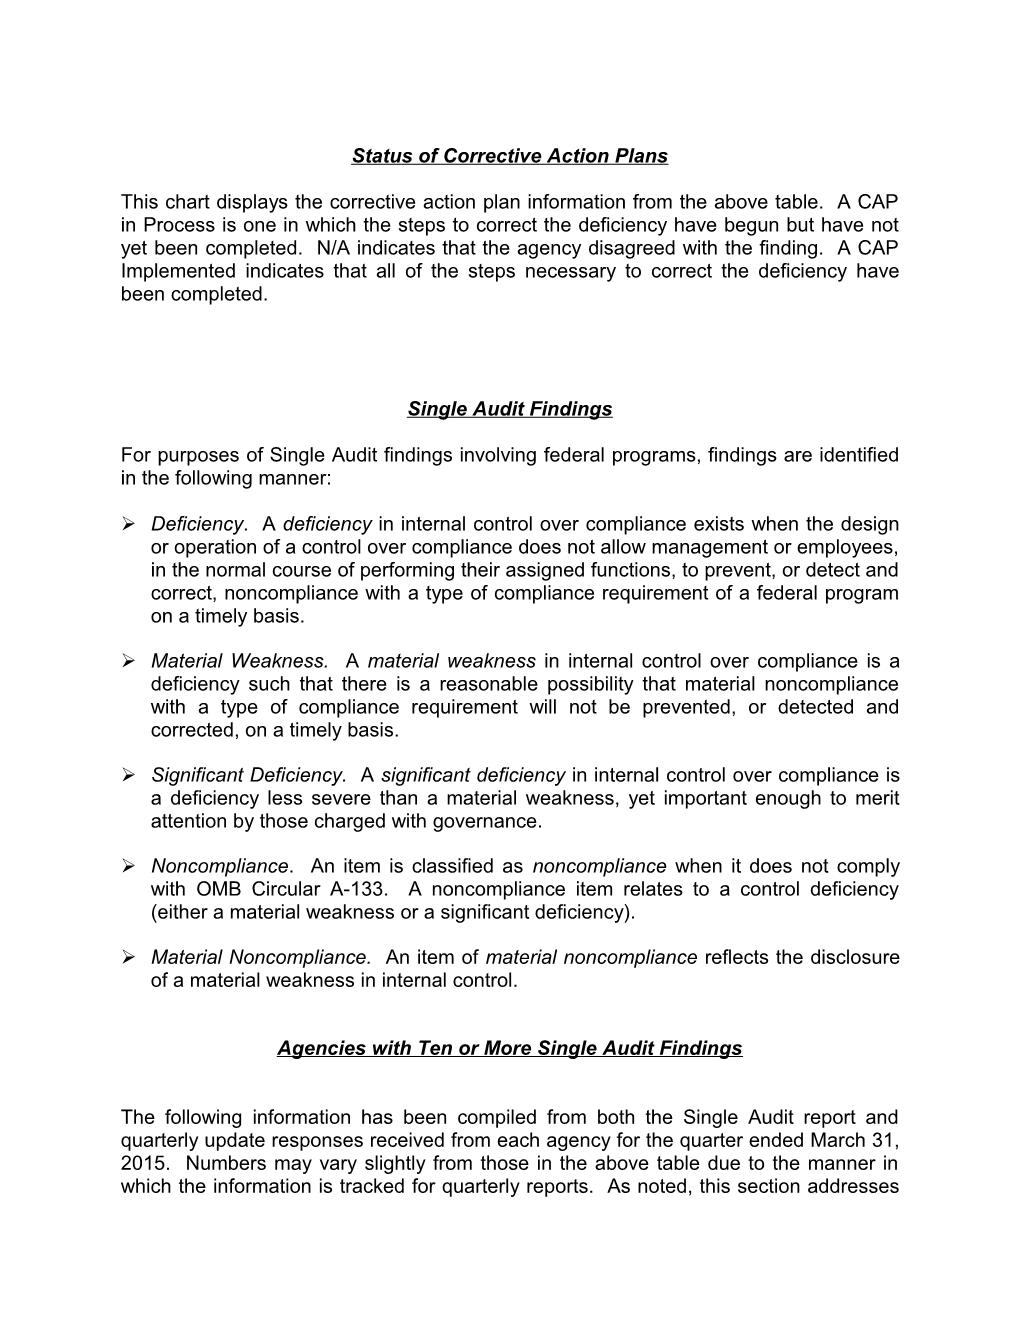 March 31, 2015 Report on Prior Single Audit Findings